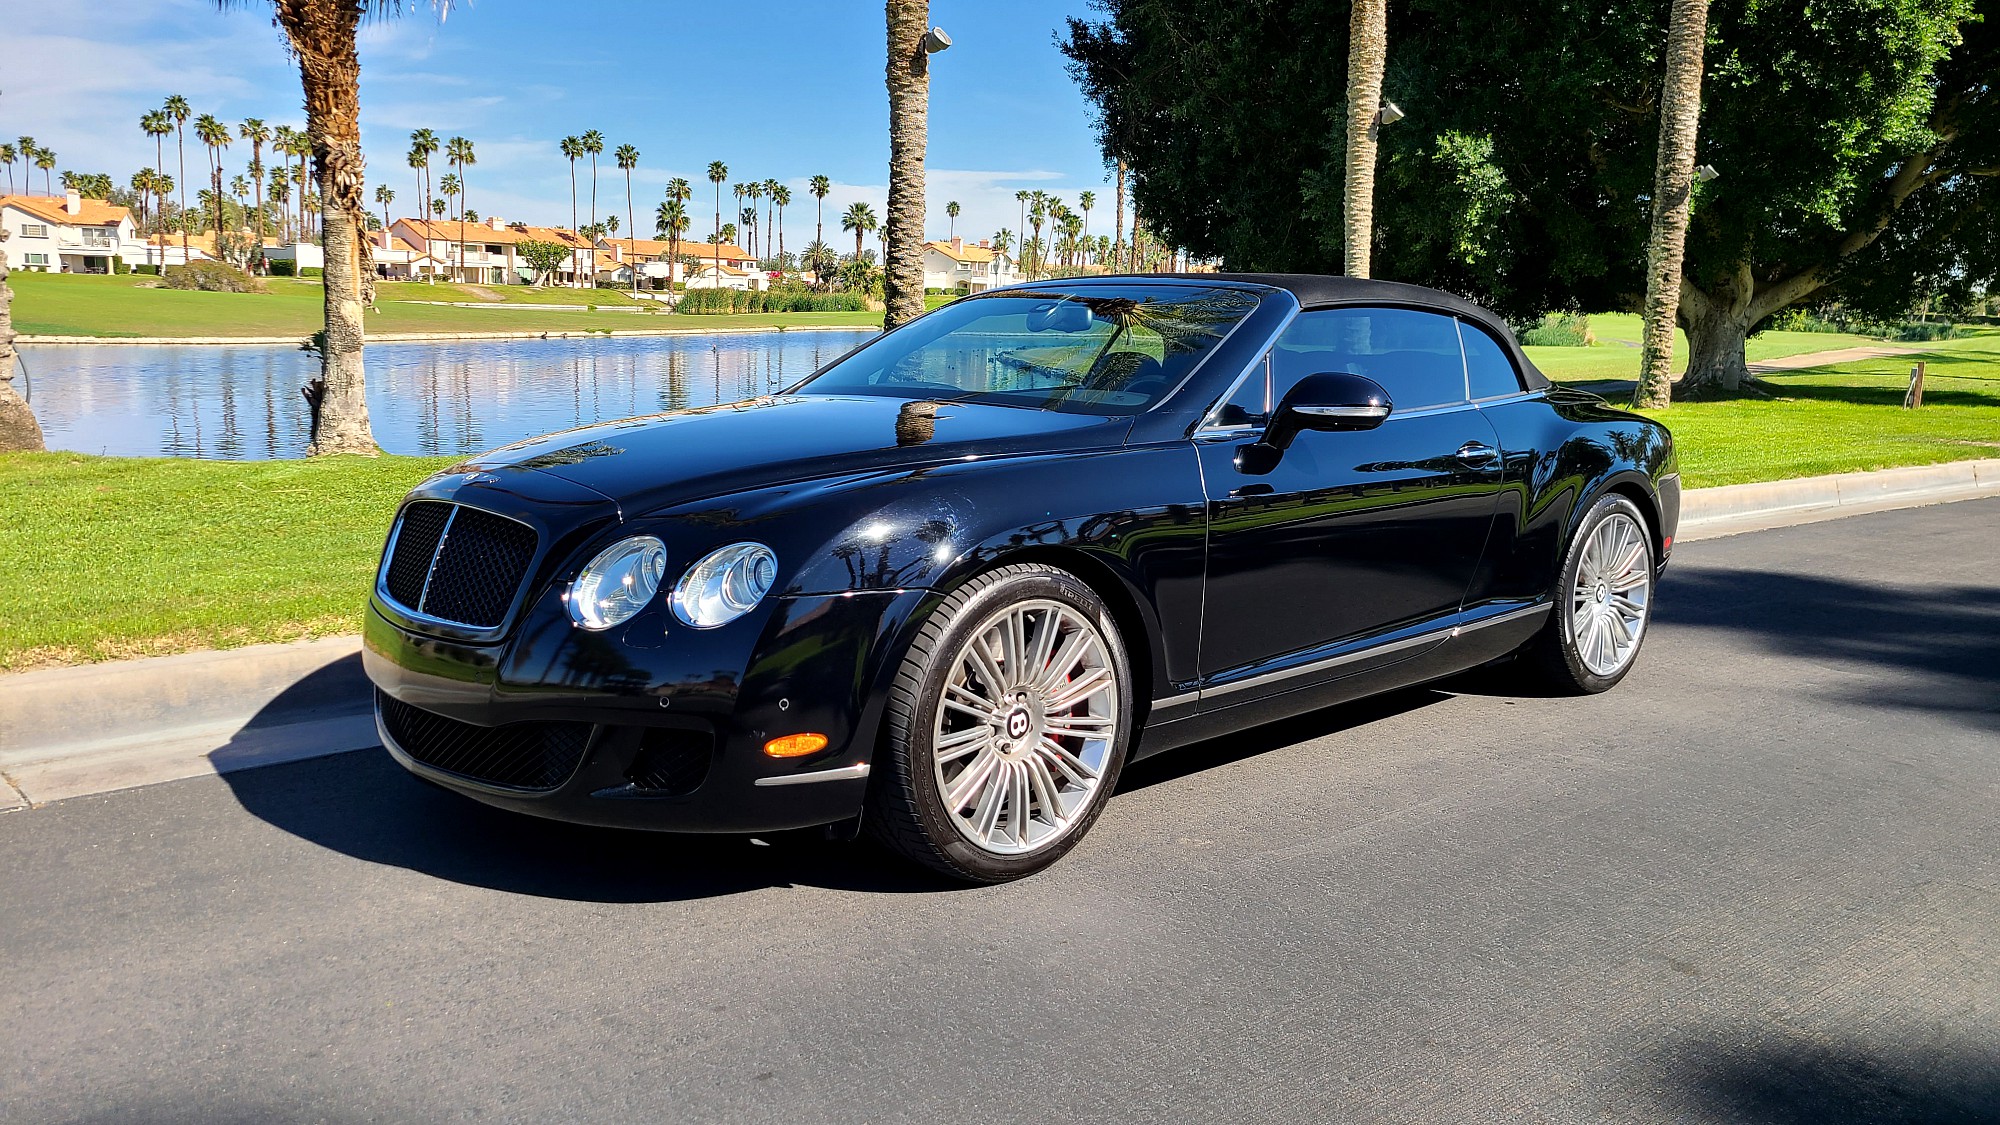 2010 BENTLEY CONTINENTAL GTC SPEED - AutoDesert - Auto Desert can sell your  vehicle for you on consignment. We will list, market and sell any vehicle  that meets our market needs. Under